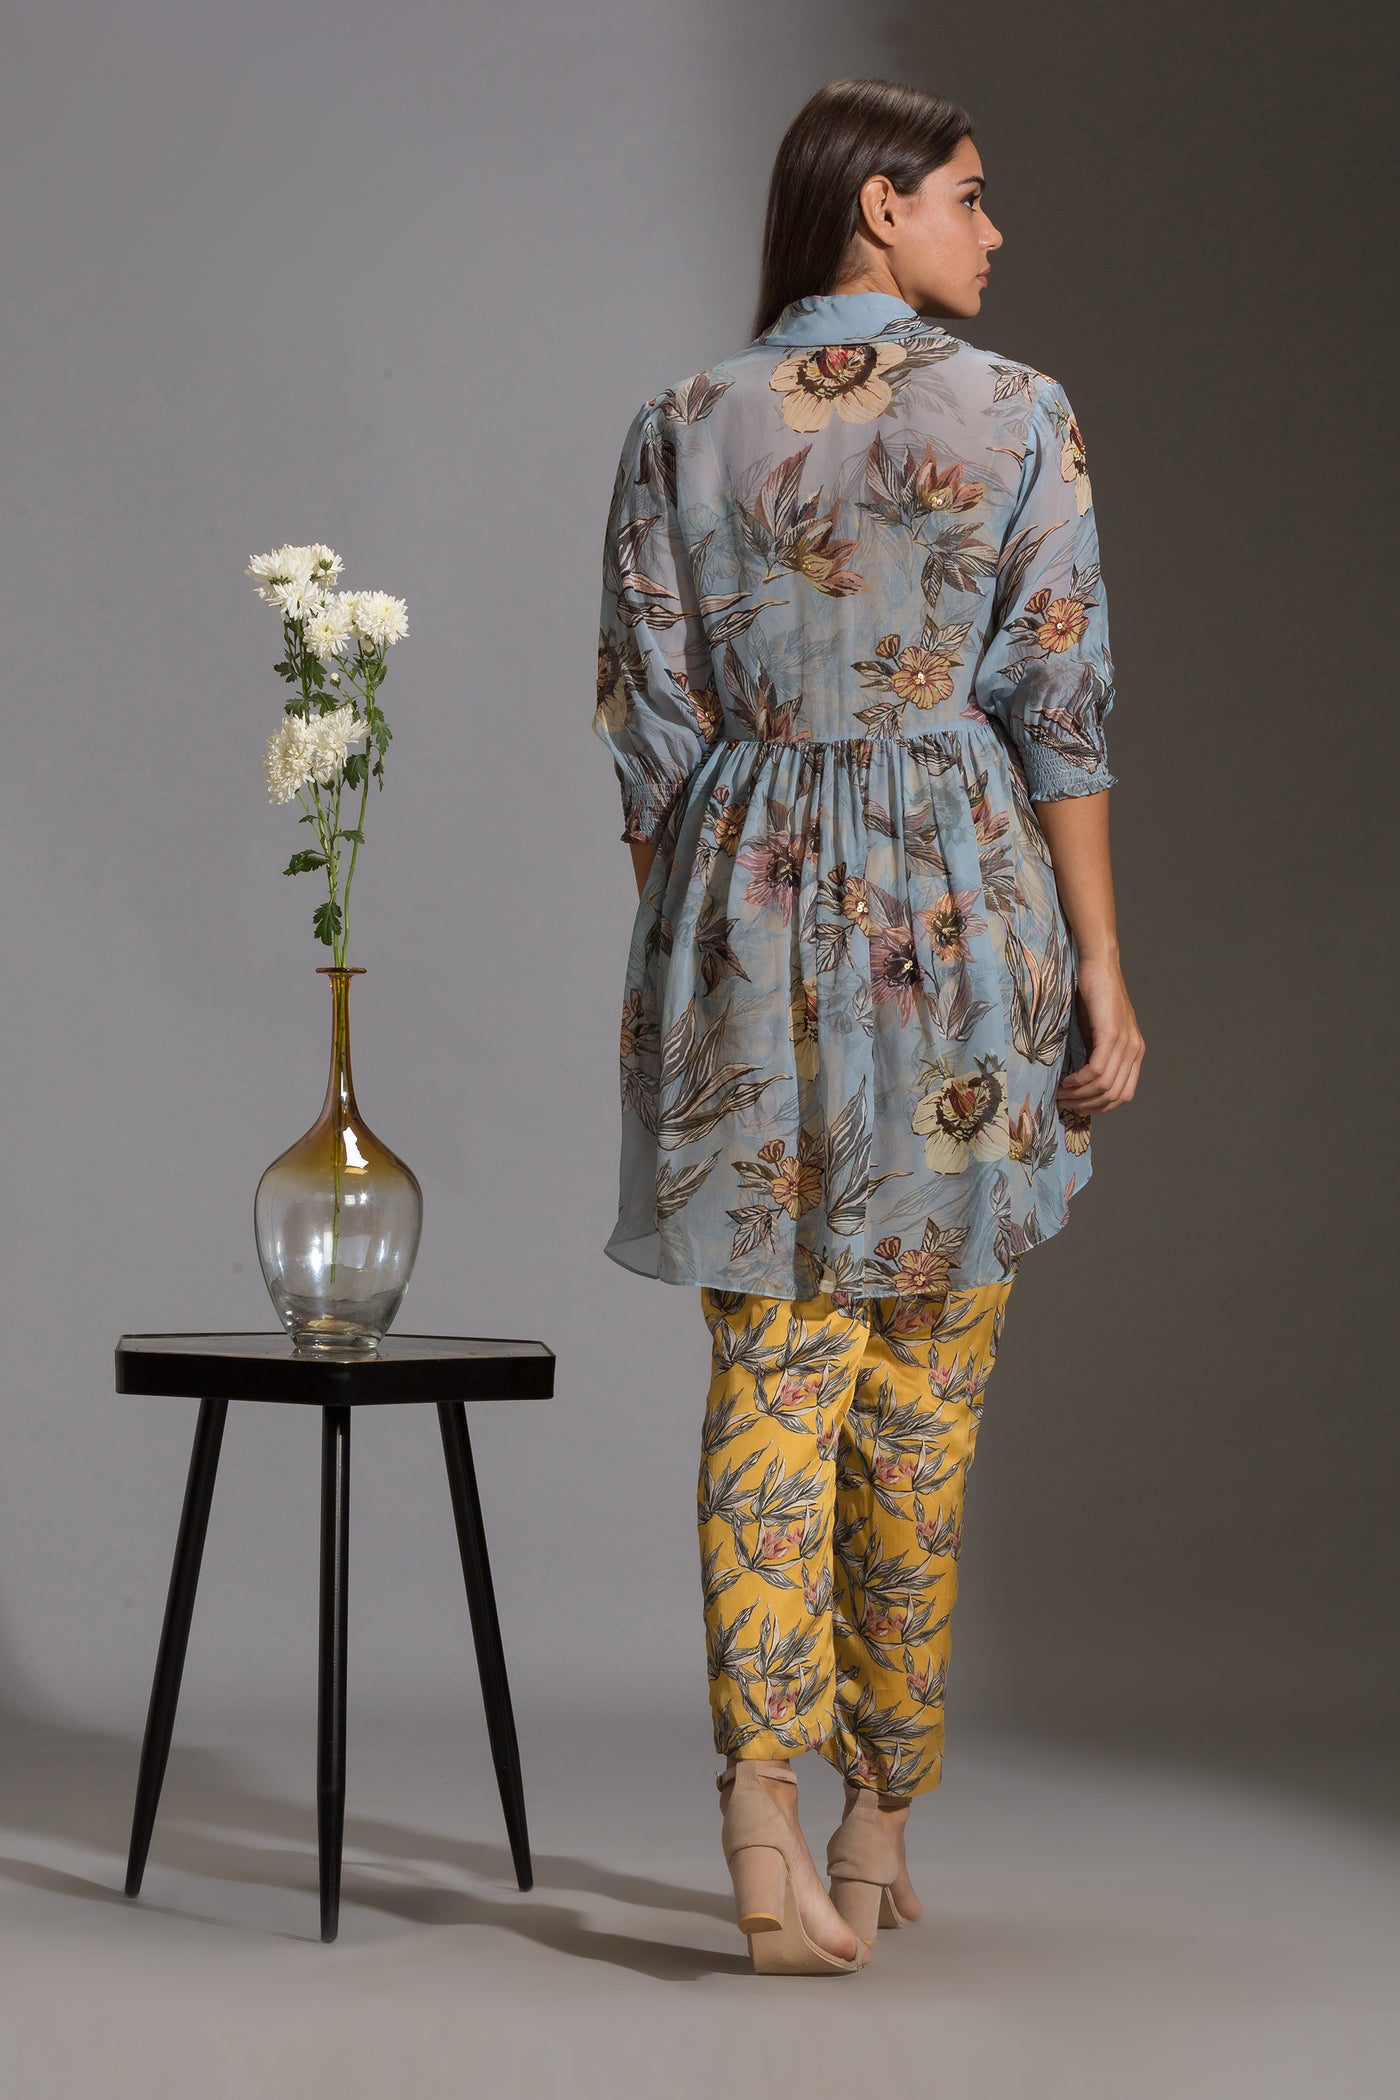 sougat paul Printed narrow bottom jumpsuit paired with chiffon collared jacket and rushed sleeves blue yellow fusion online shopping melange singapore indian designer wear